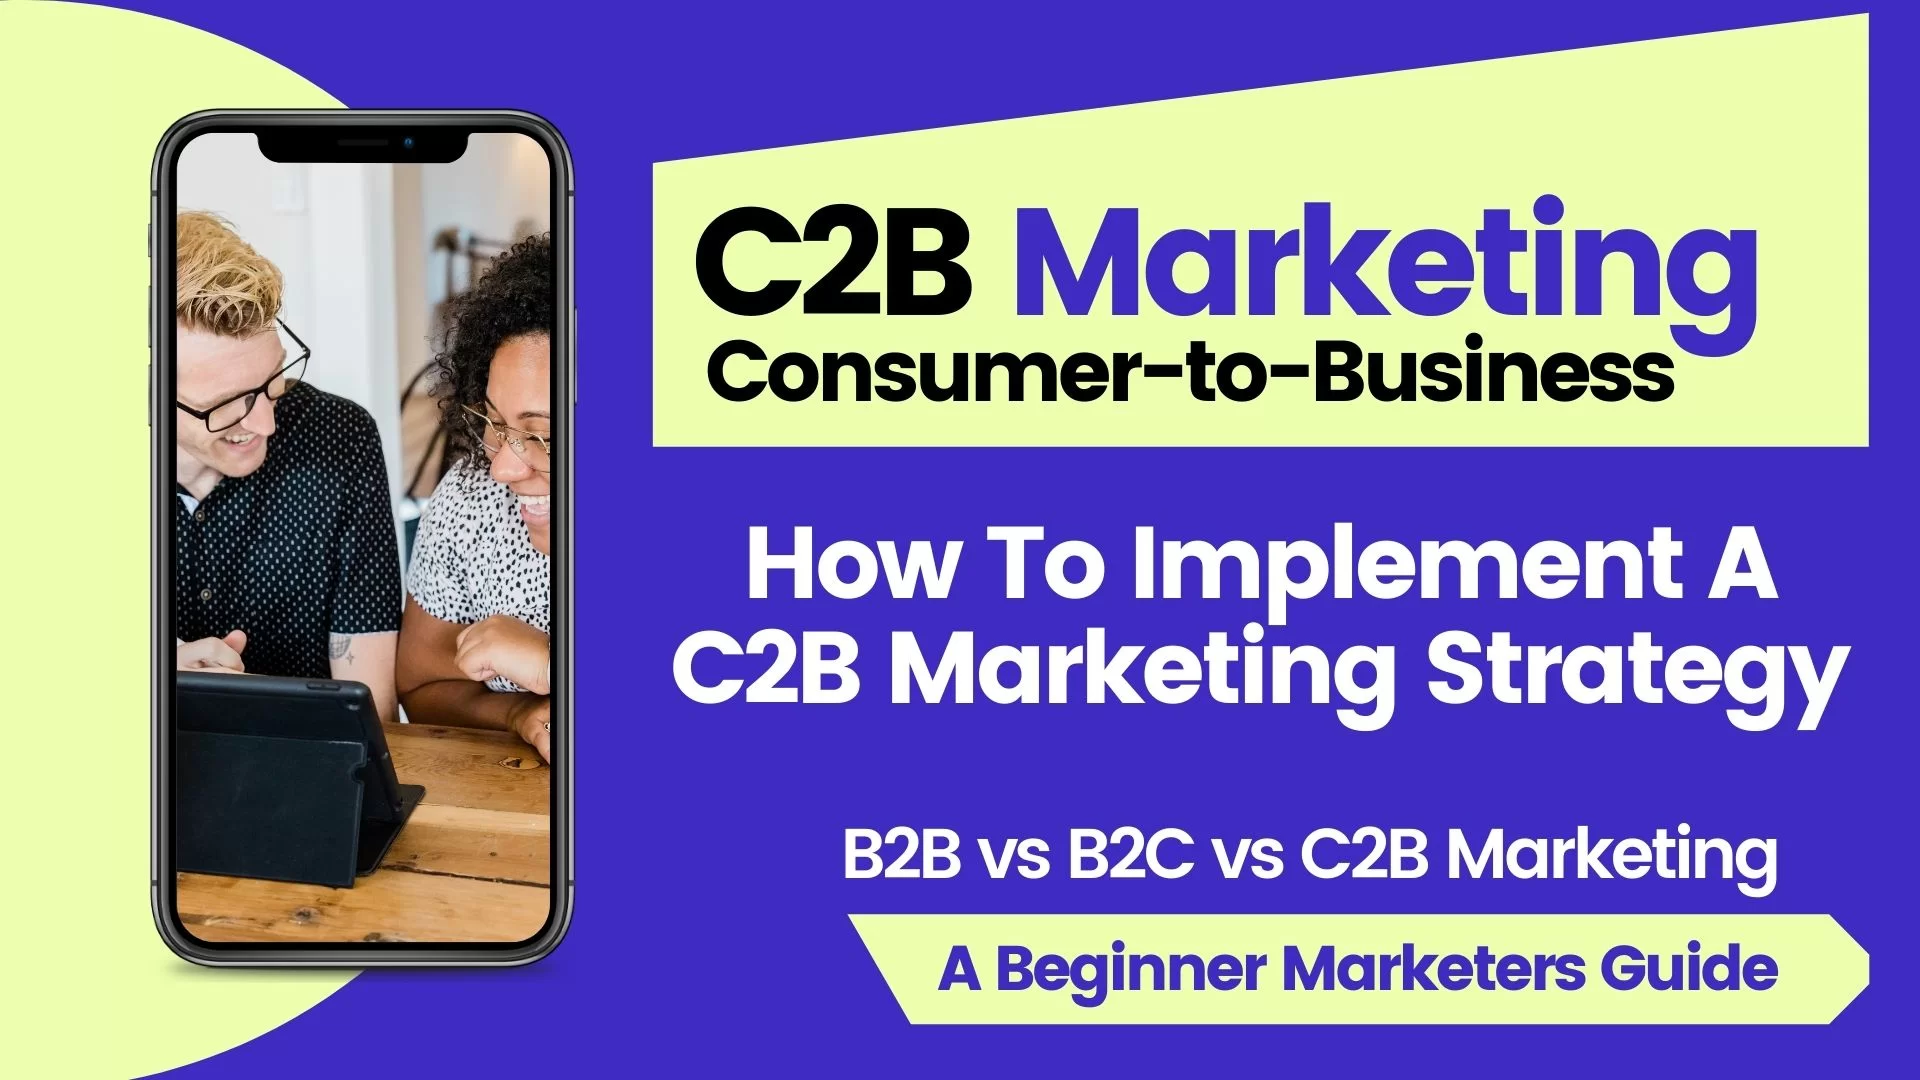 What Is C2B Marketing?